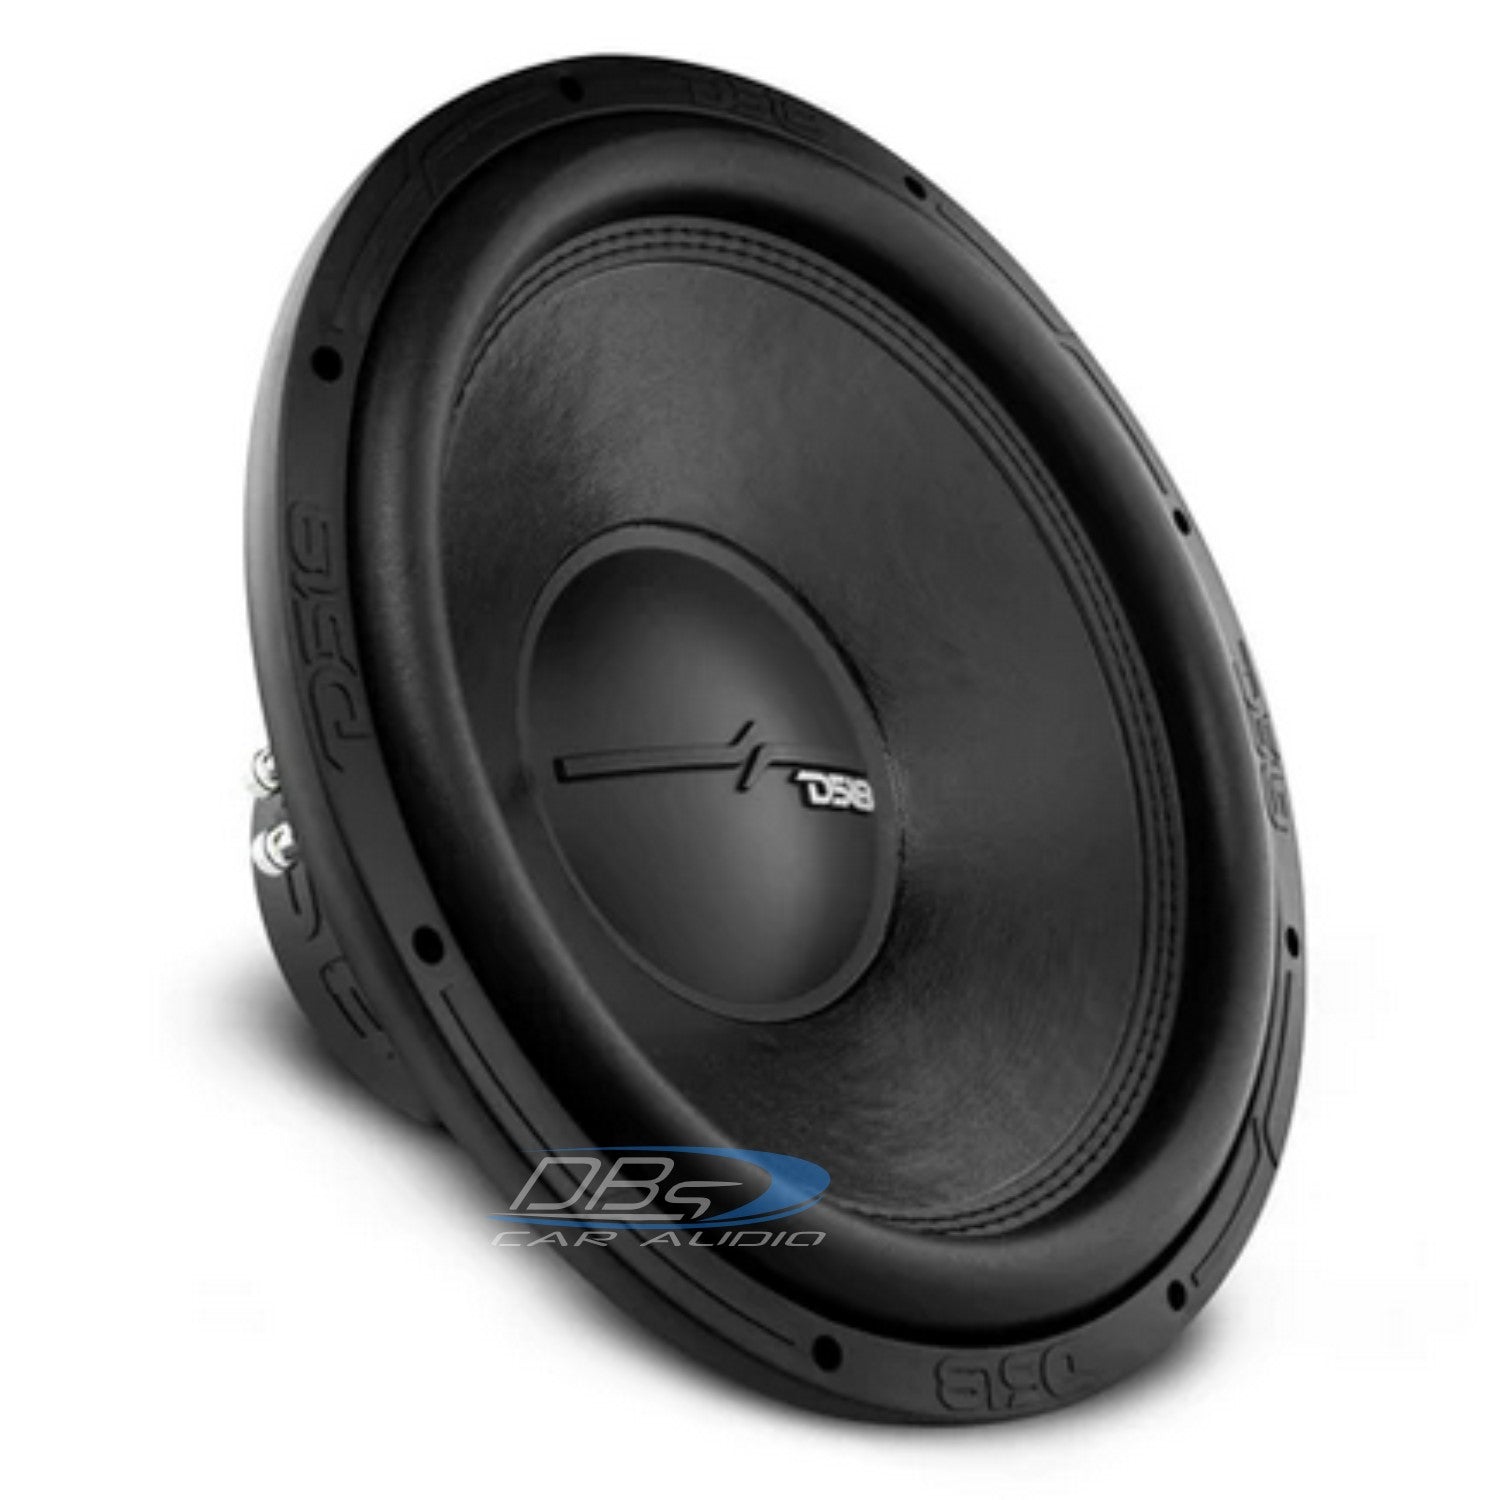 15" Subwoofers